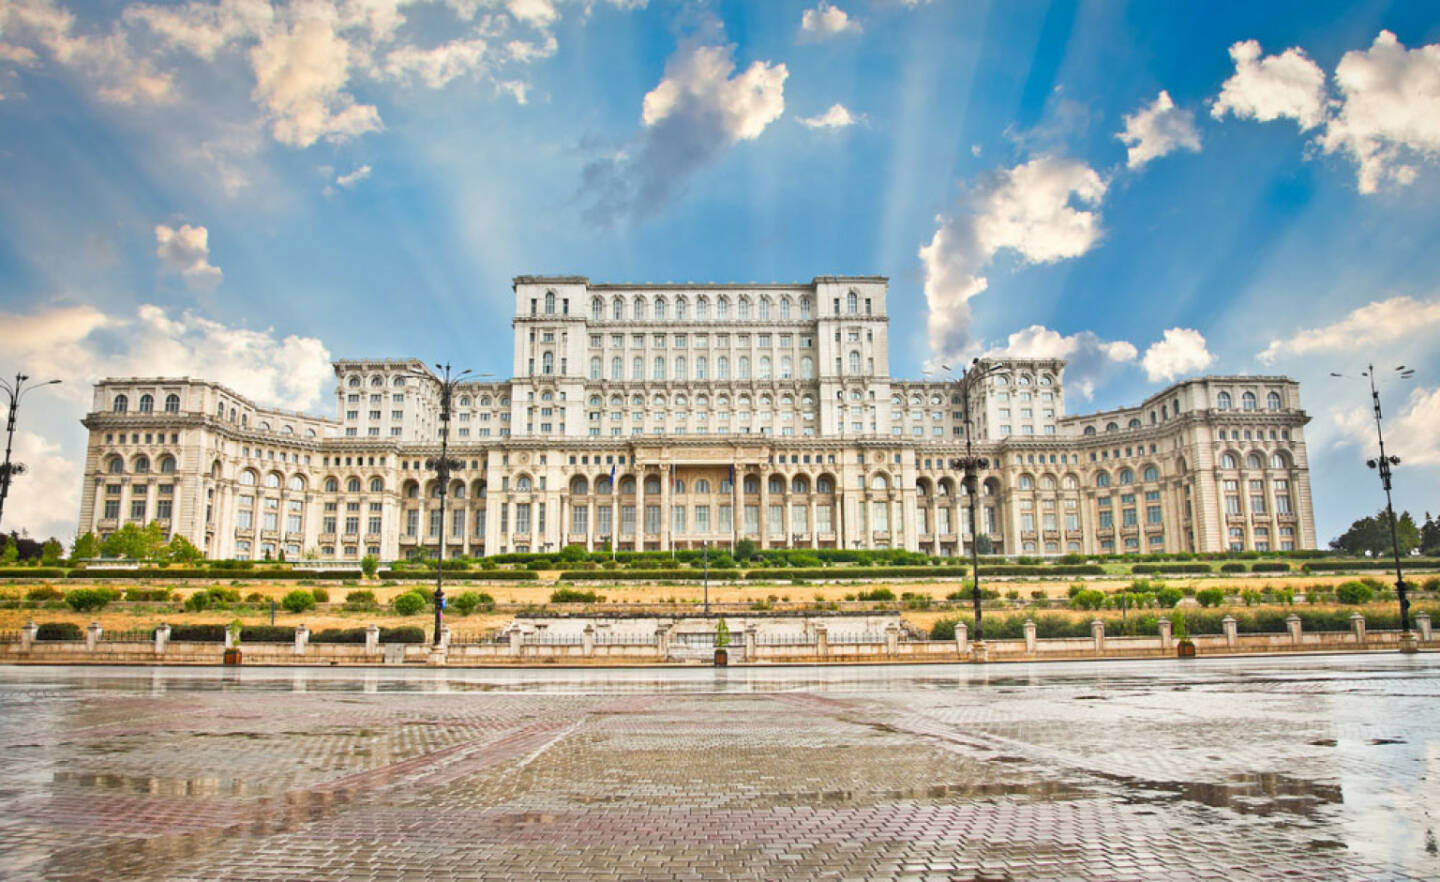 Bukarest, Rumänien, Parlament, http://www.shutterstock.com/de/pic-127268432/stock-photo-parliament-of-romania-the-second-largest-building-in-the-world-built-by-dictator-ceausescu-in.html 